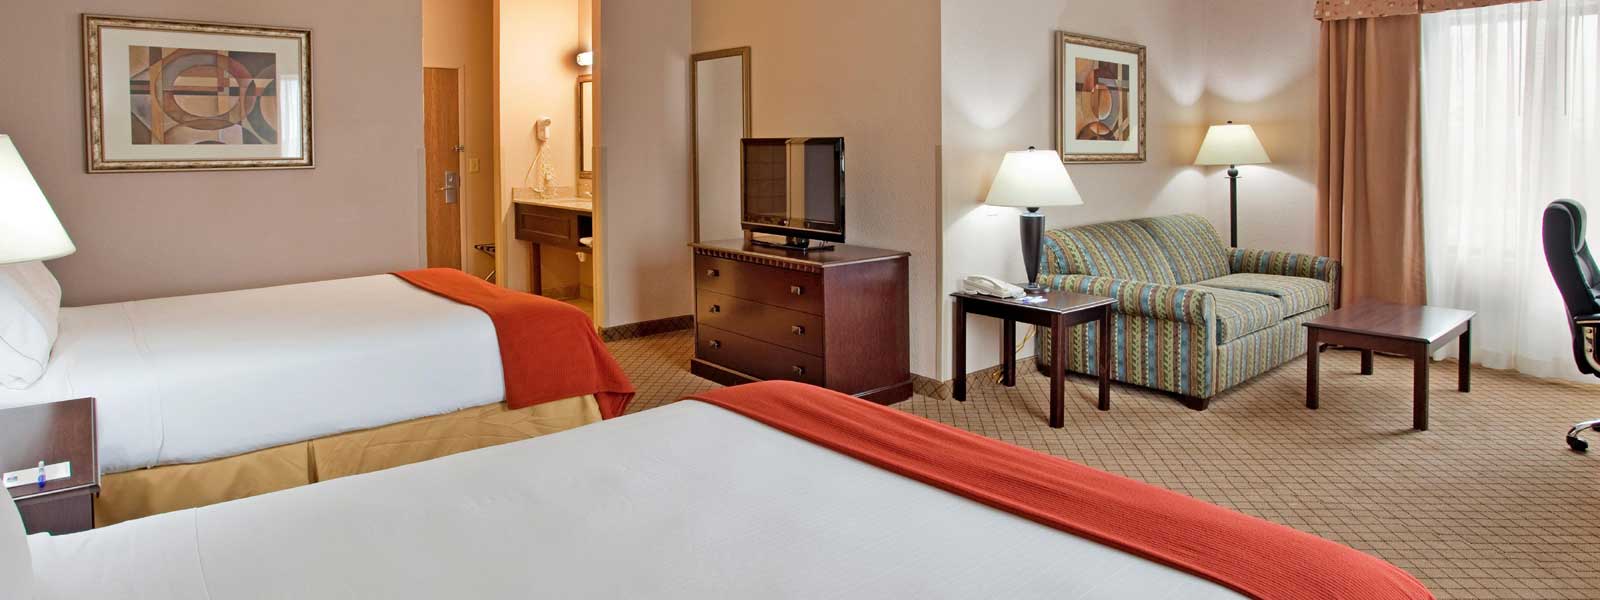 Holiday Inn Express & Suites Liberty Affordable Lodging in Kansas City Missouri Cheap Budget